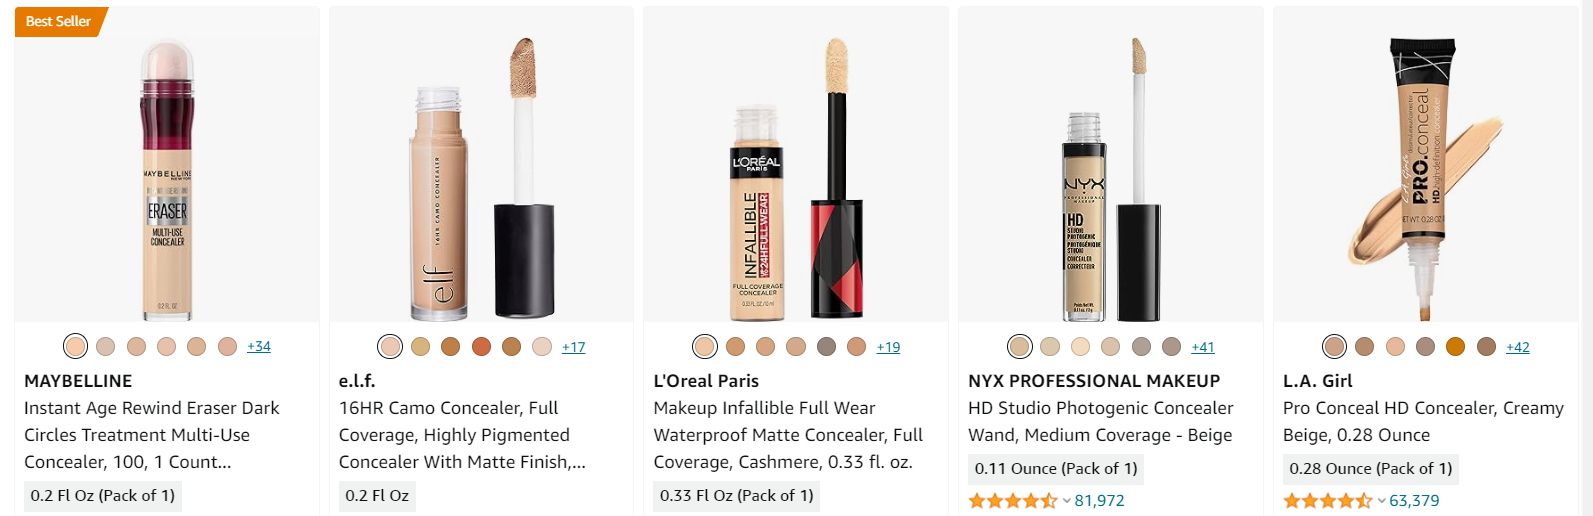 Concealers as beauty products to sell.